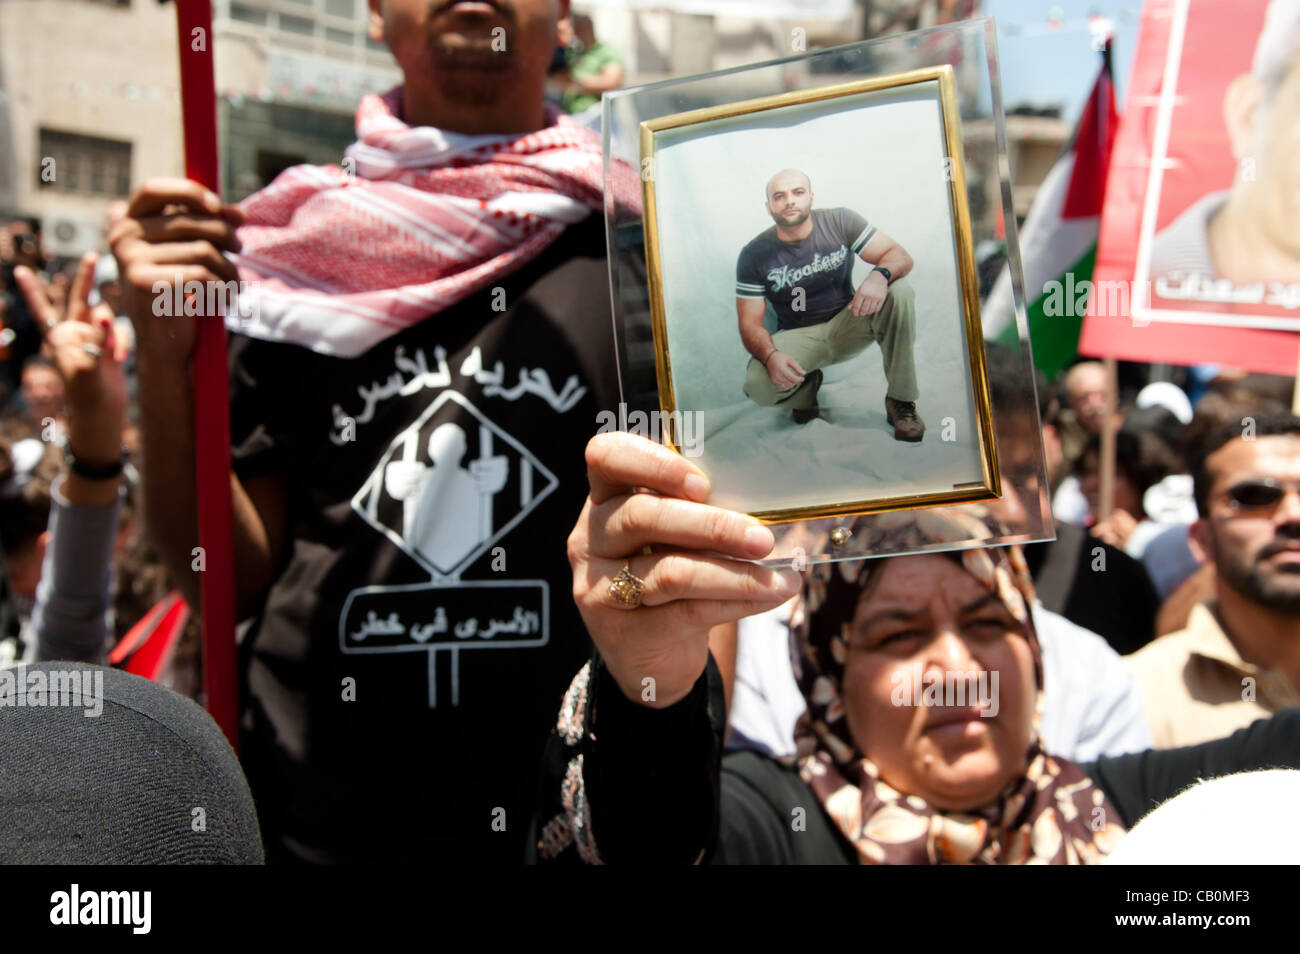 RAMALLAH, PALESTINIAN TERRITORIES - MAY 15, 2012: A Palestinian woman carries a  portrait of her imprisoned son next to a man wearing a t-shirt expressing support for Palestinian prisoners in Israeli jails. Stock Photo